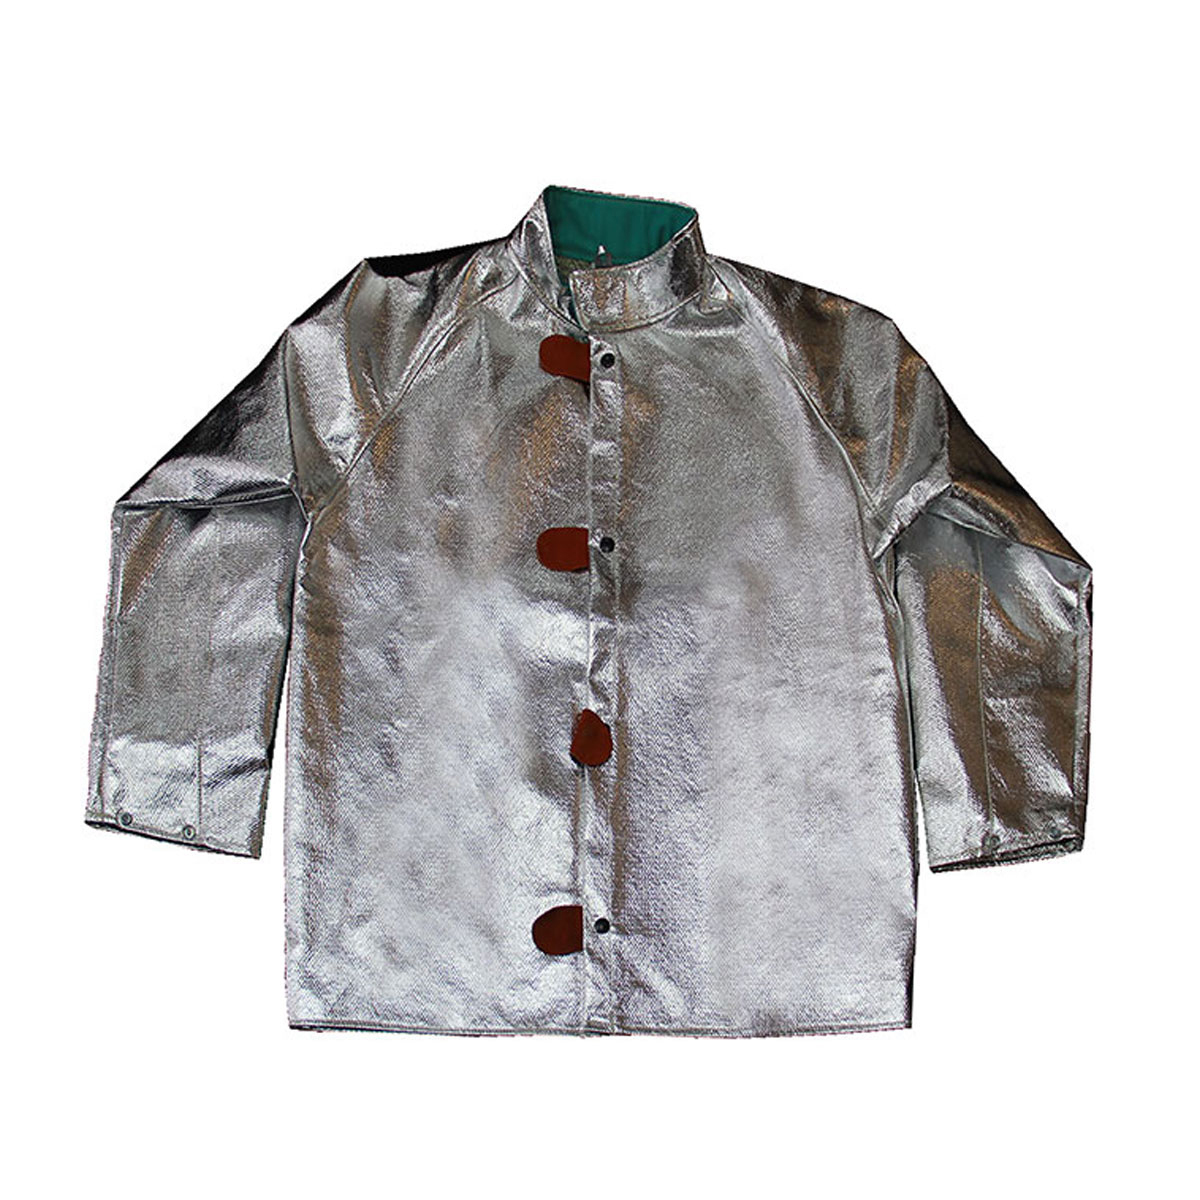 Chicago Protective Apparel X-Large Silver Aluminized Carbon Para-Aramid Blend Heat Resistant Jacket